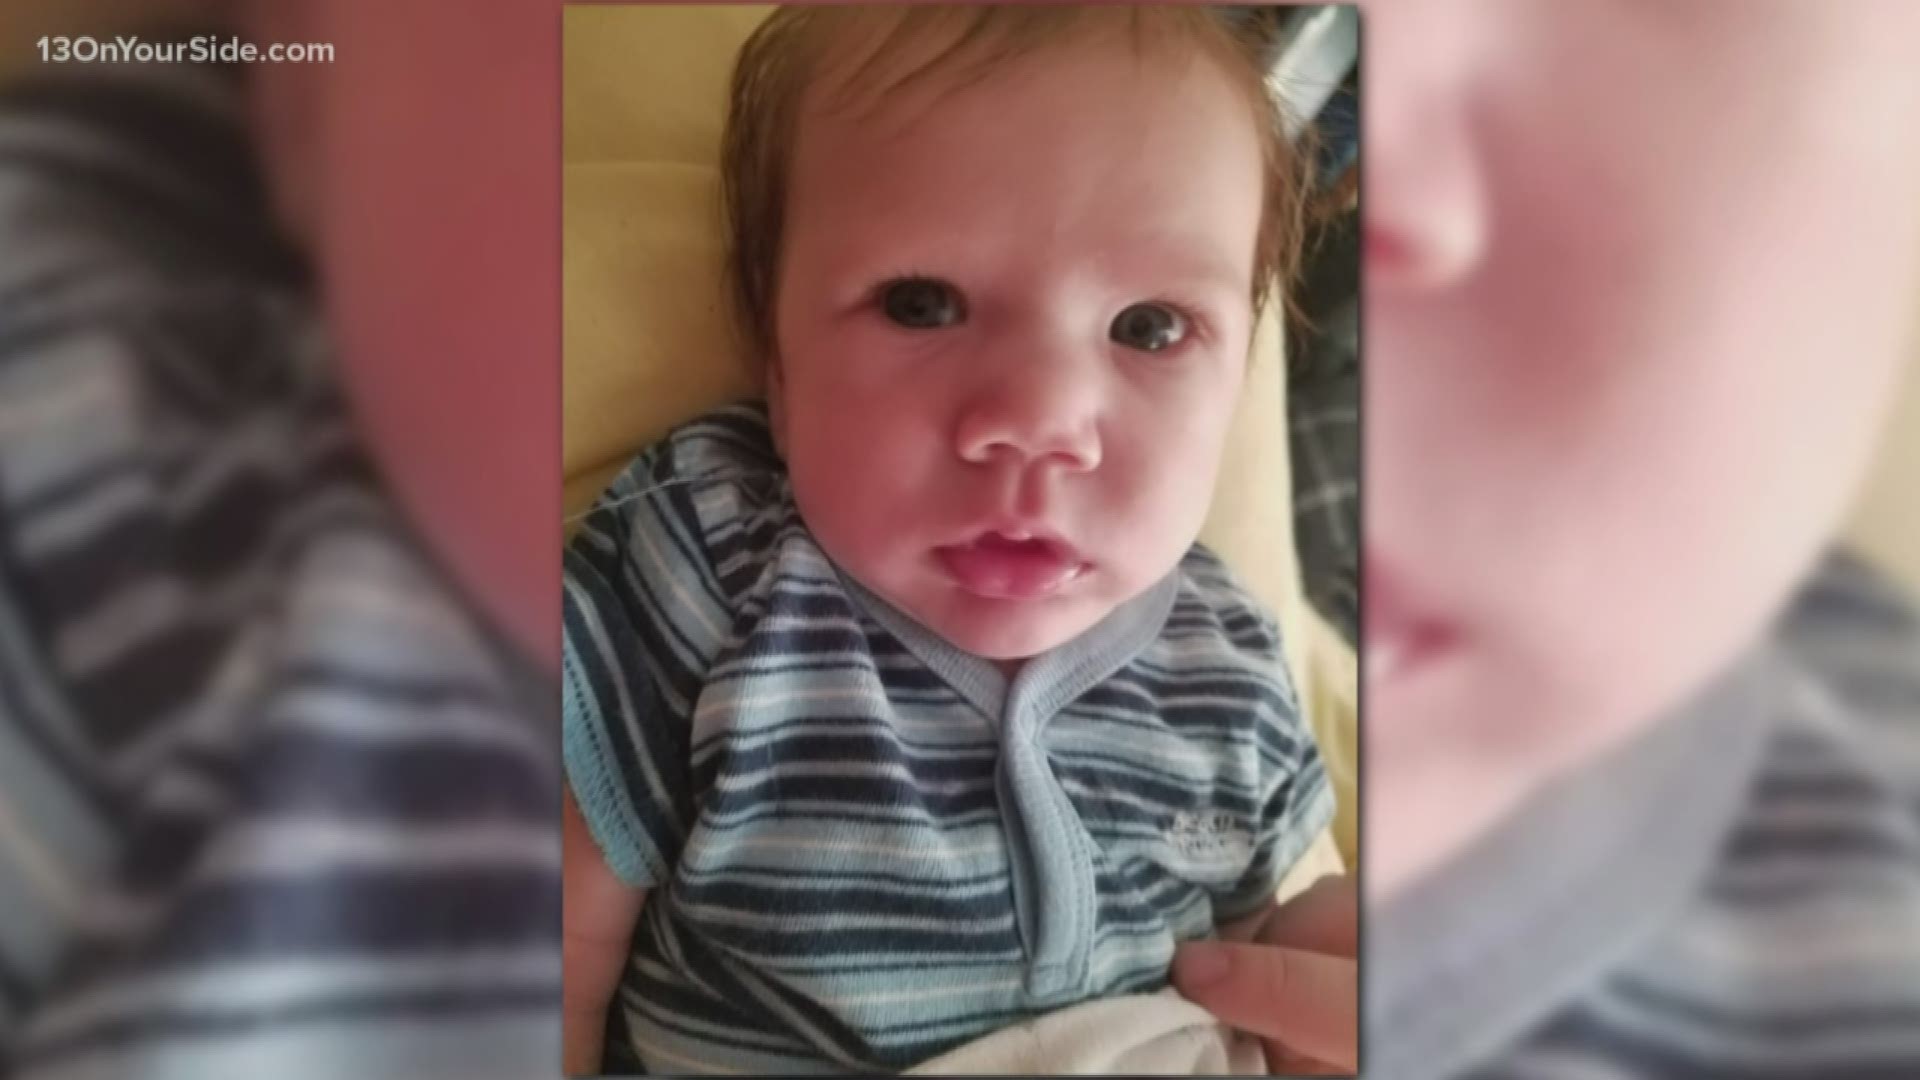 The parents of an 18-month-old boy who died of dehydration have pleaded guilty to second-degree murder.